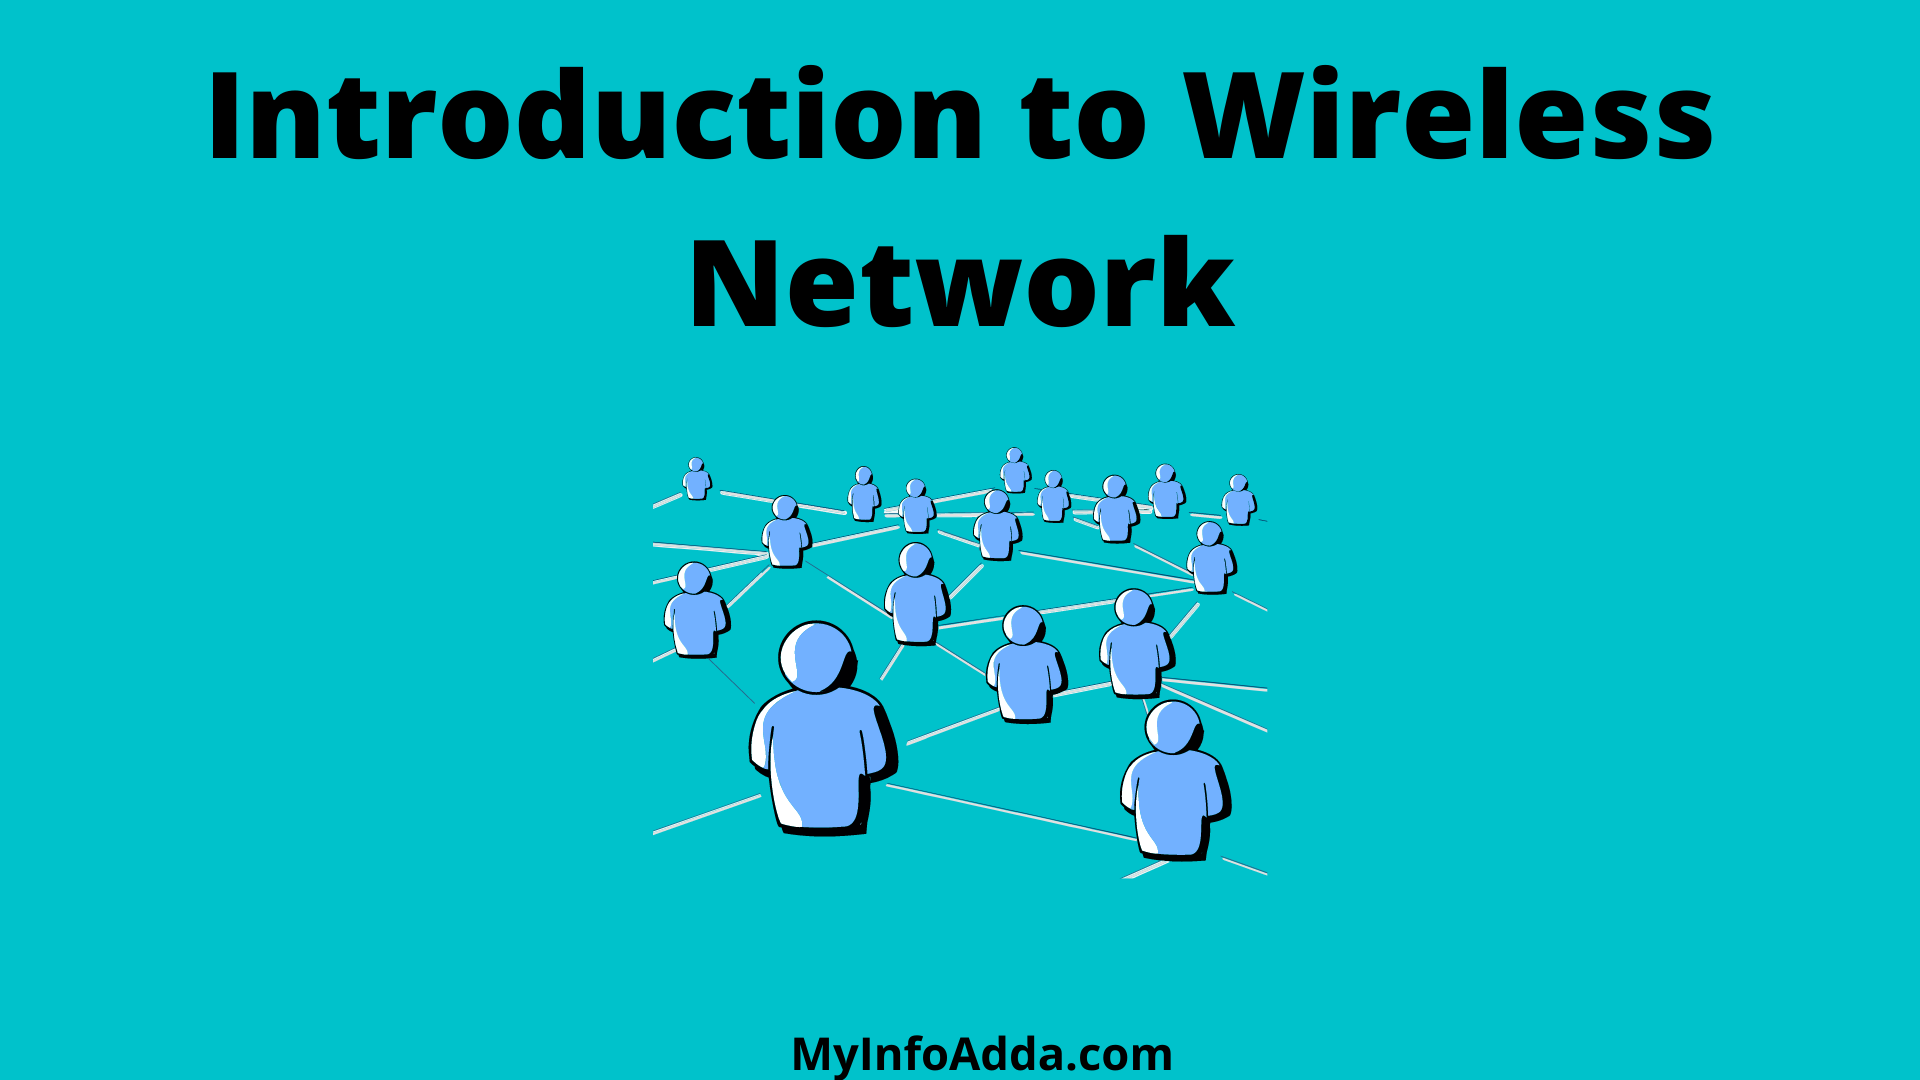 Introduction to Wireless Network